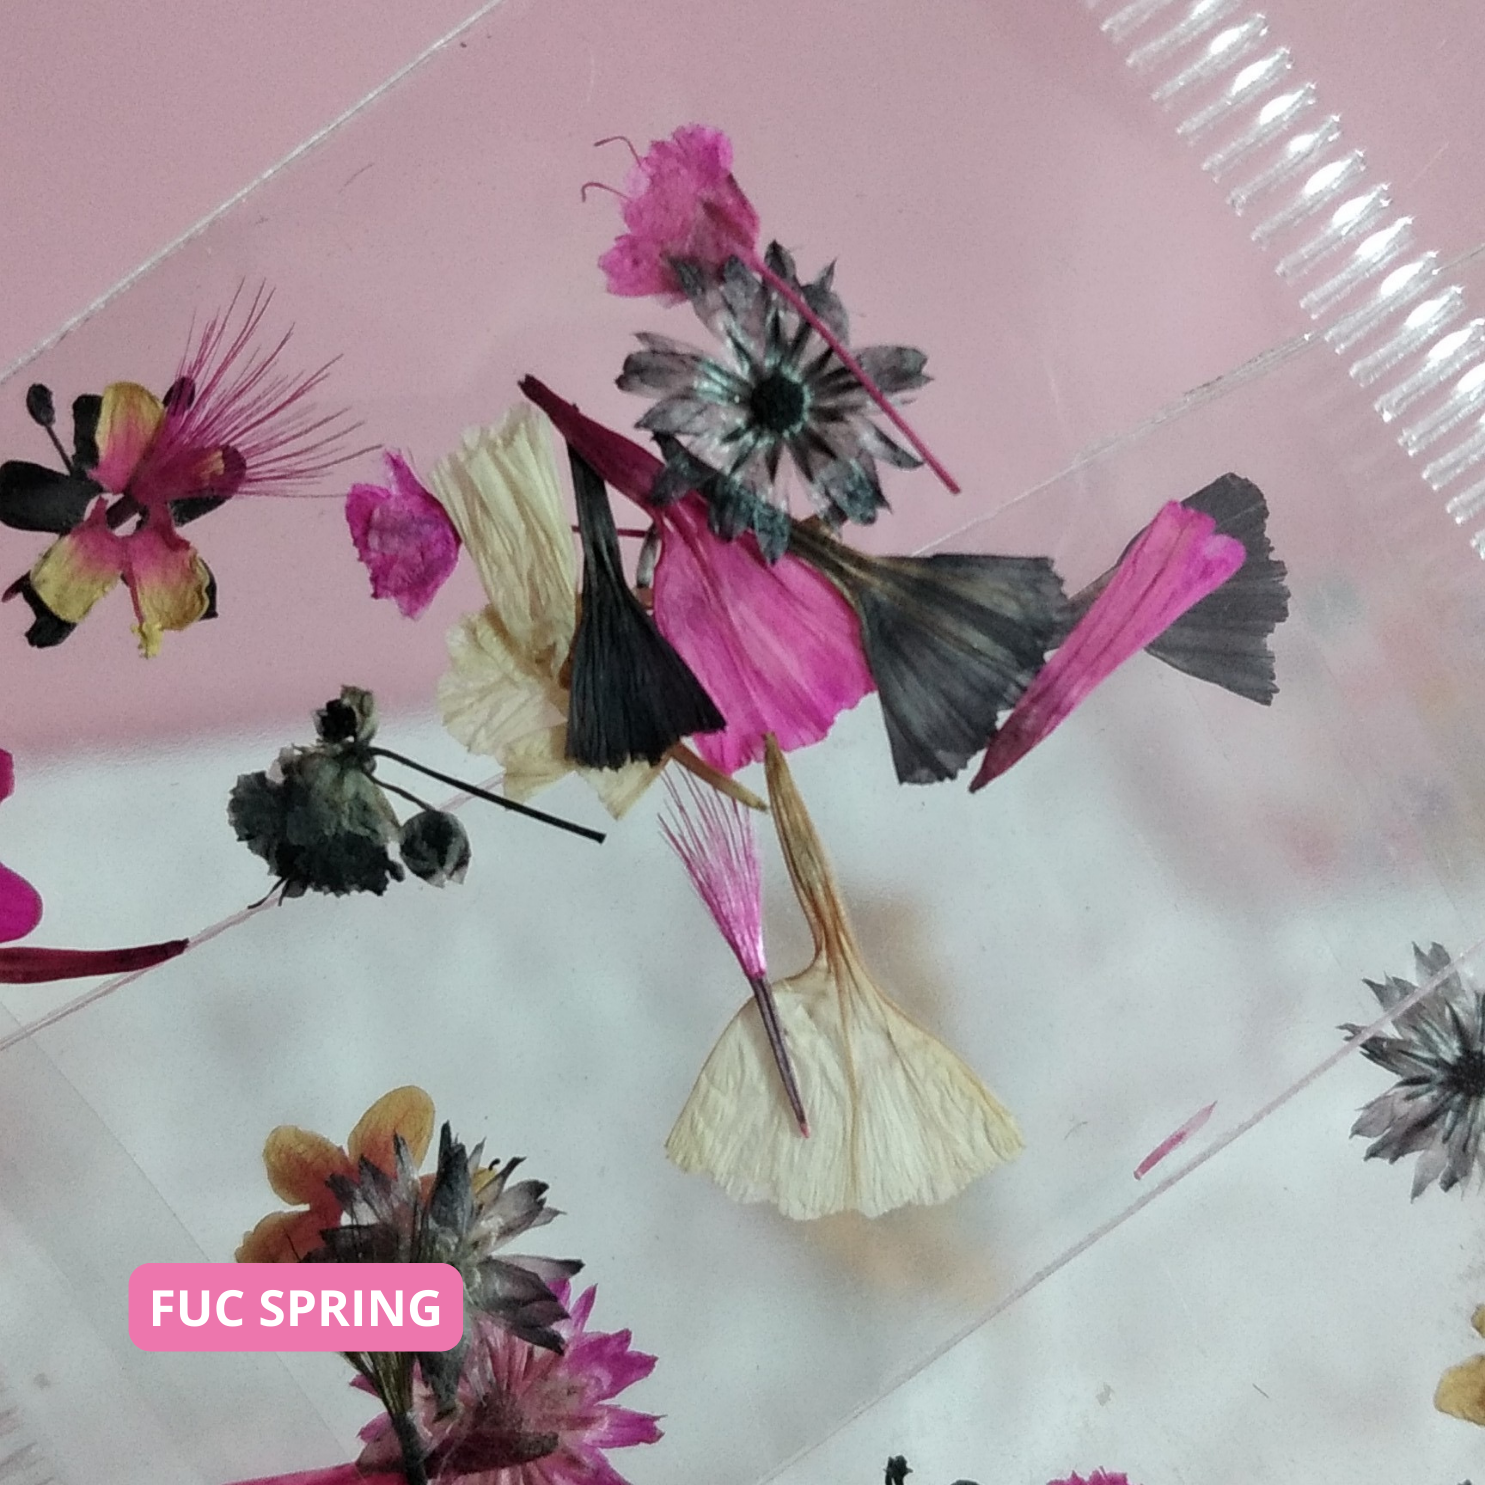 Fuc Spring Dried Flowers